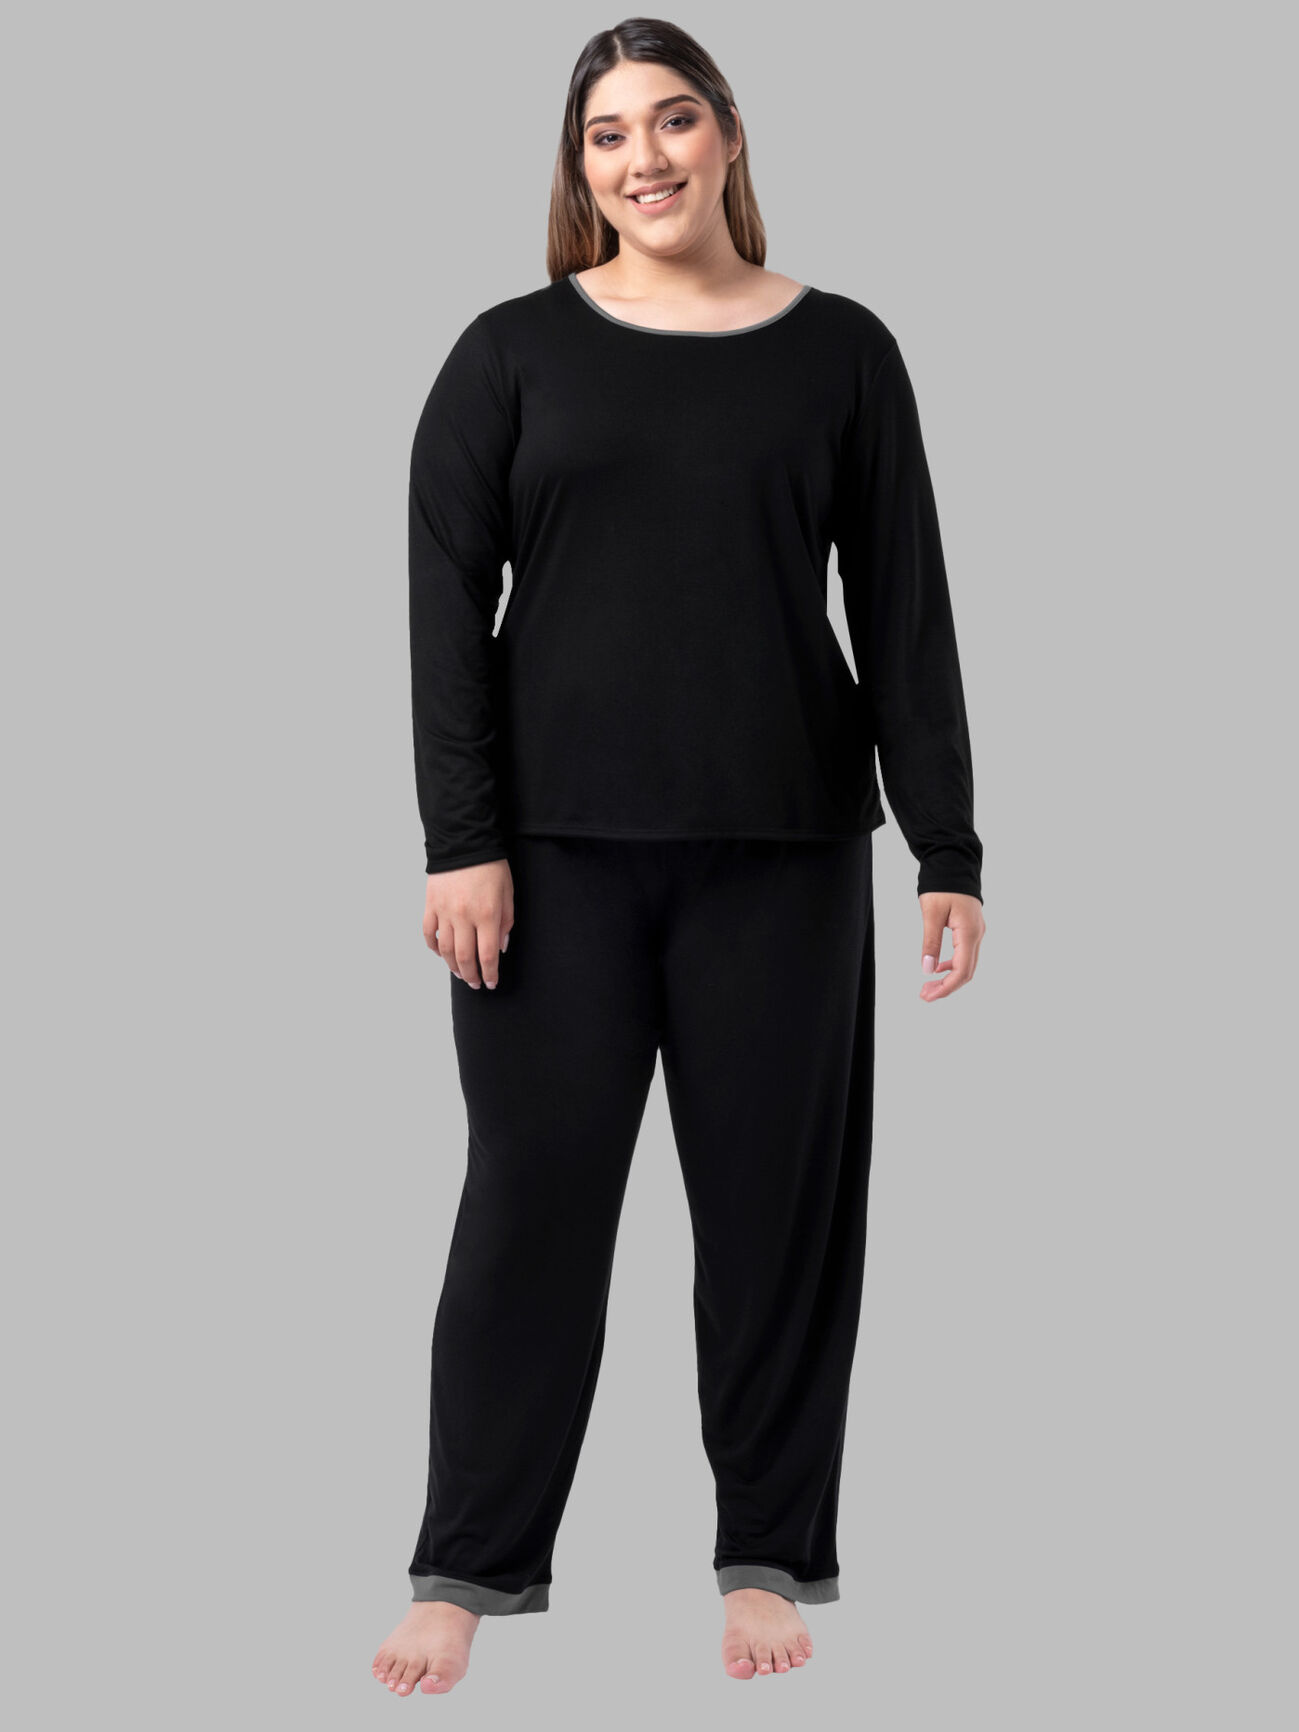 Thermal Underwear Pants : Plus Size Clothing